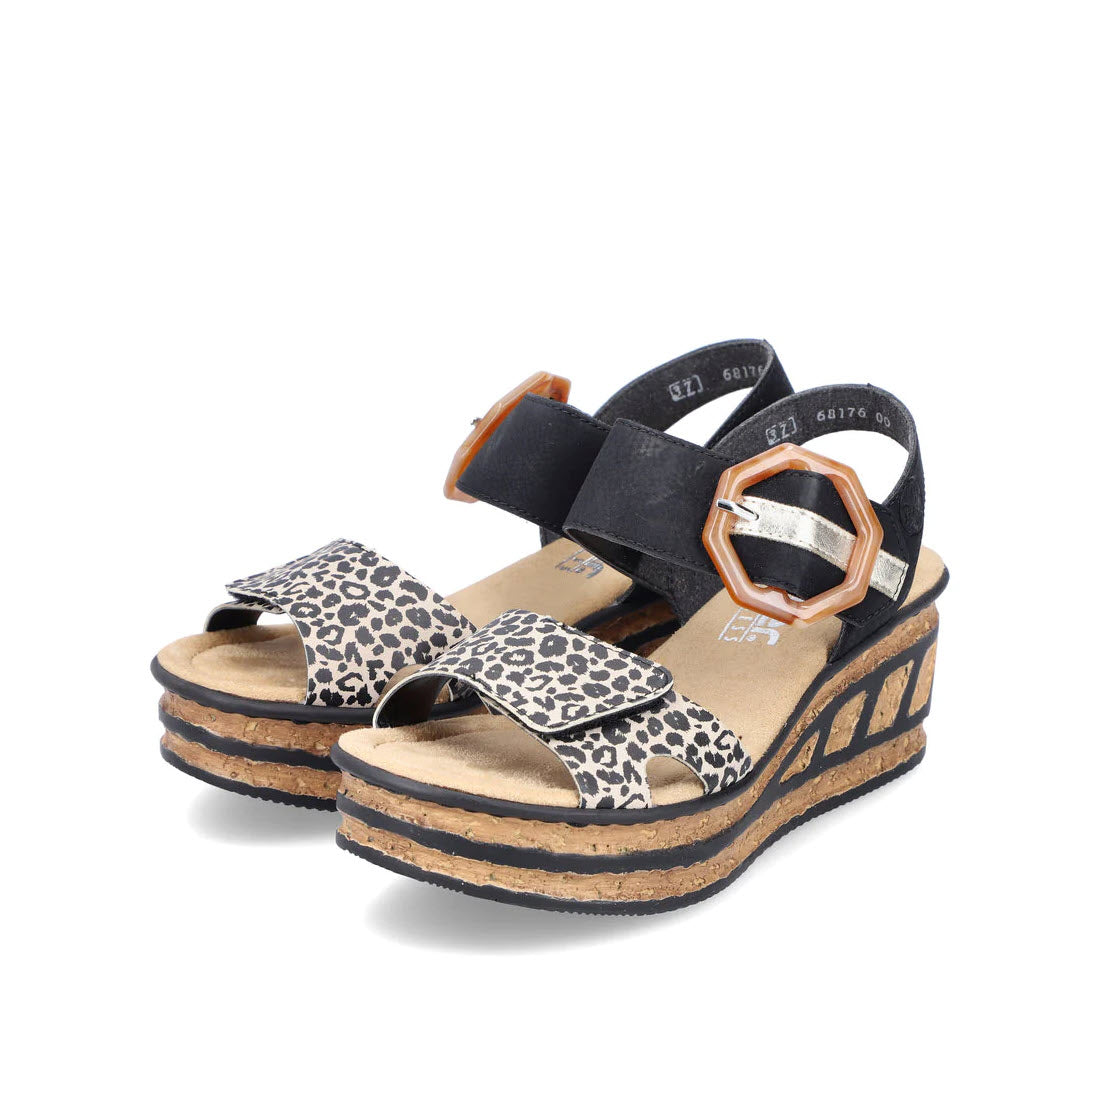 A pair of Rieker RIEKER BIG BUCKLE WEDGE LEOPARD MULTI - WOMENS with animal print straps and cork heels, isolated on a white background.